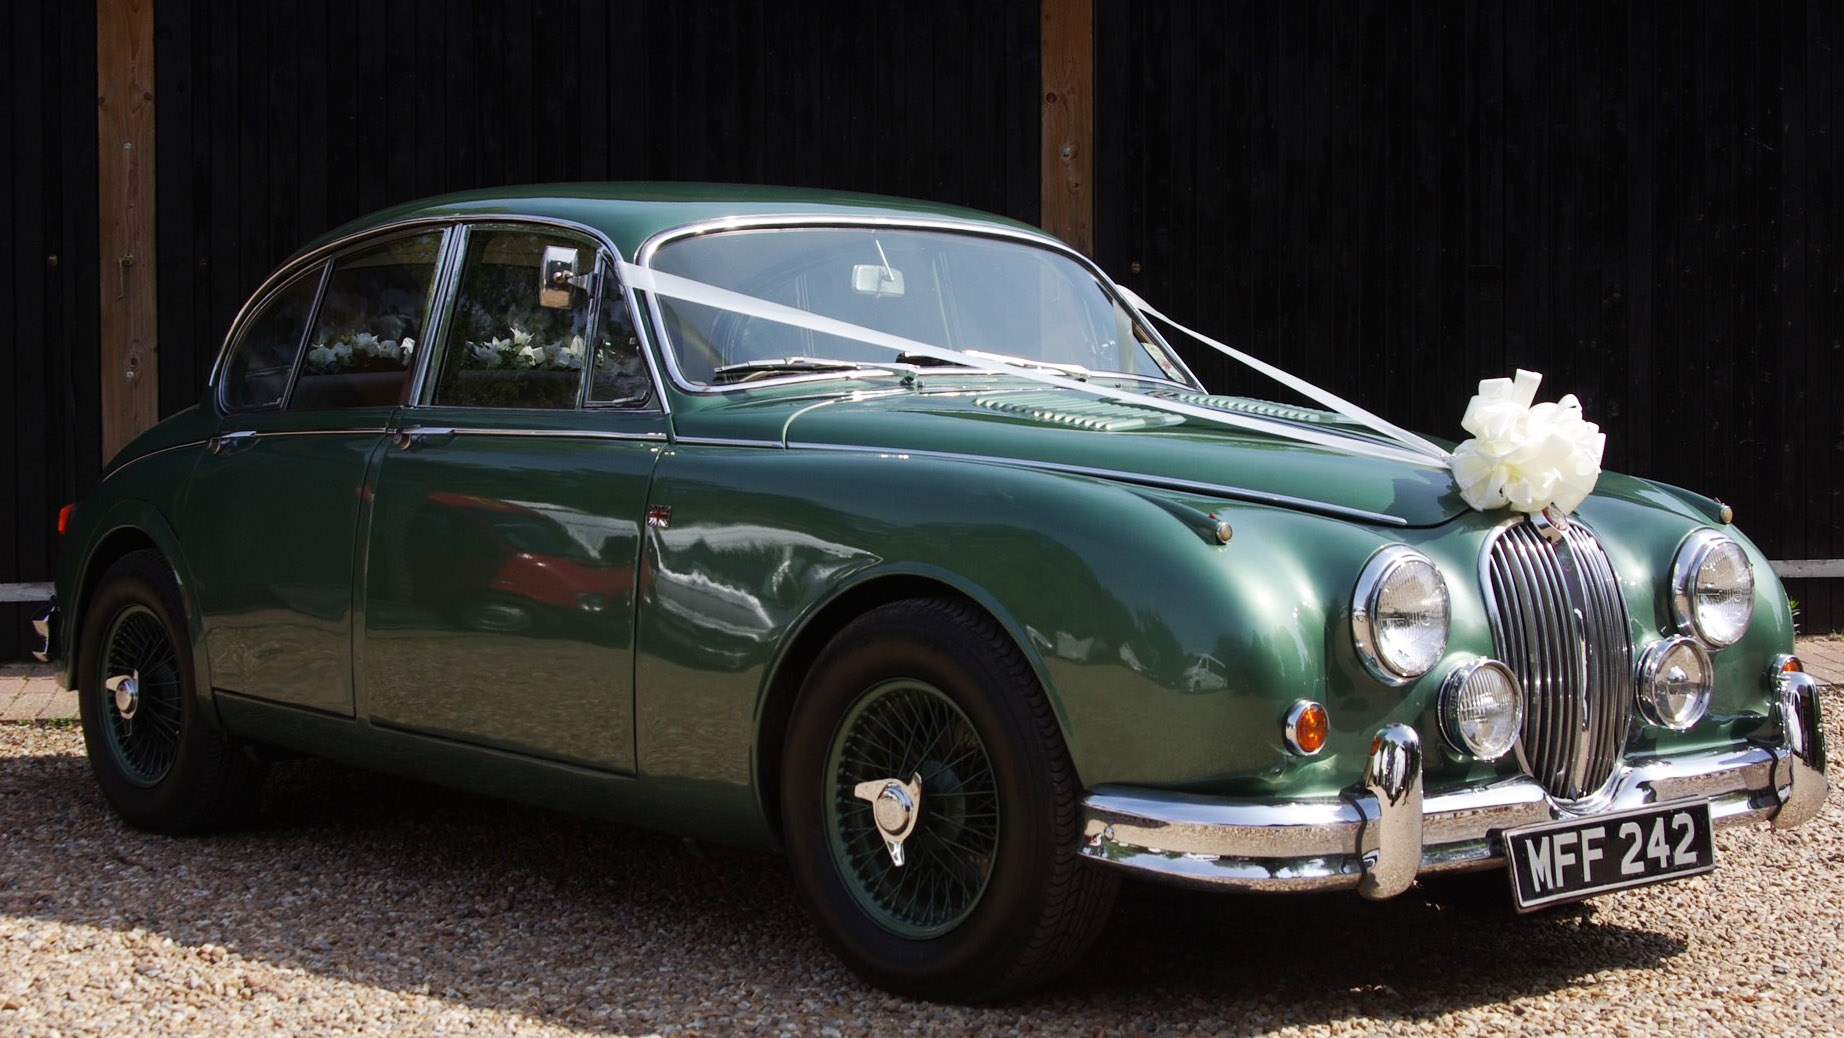 Jaguar MKII wedding car for hire in Lewes, East Sussex